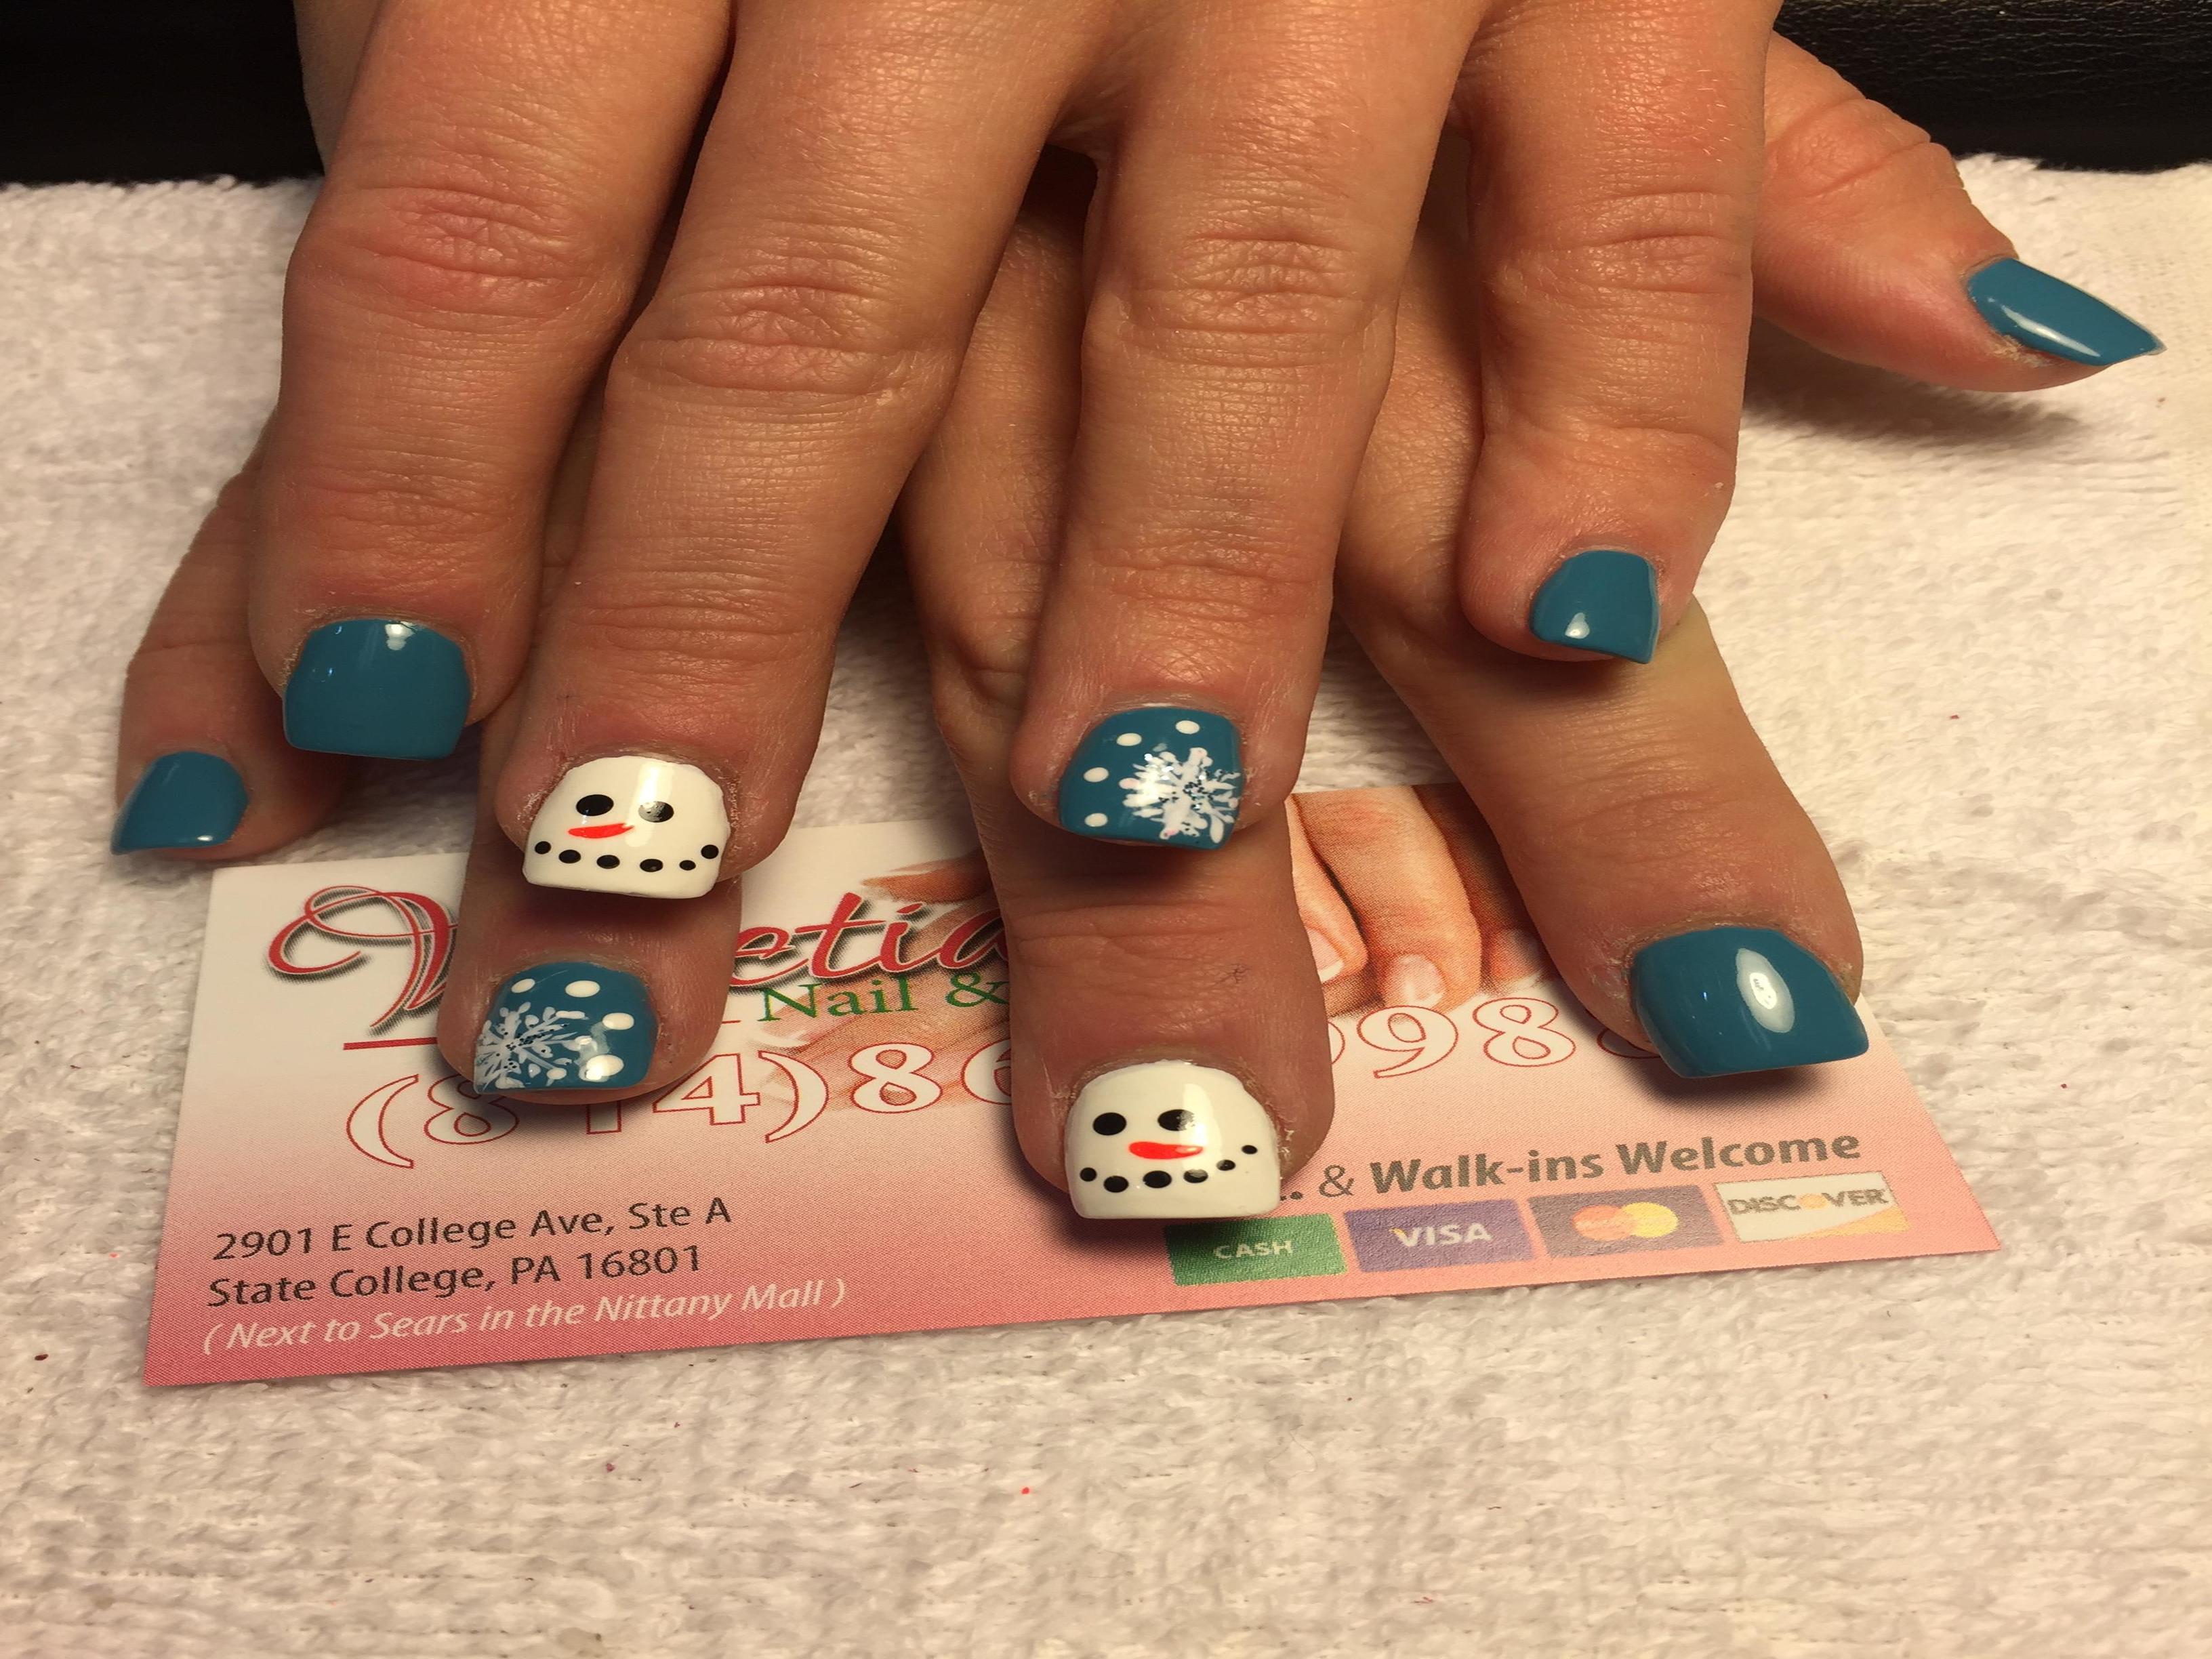 4. Top 10 Best Nail Art Near Me - Last Updated September 2021 - Yelp - wide 6